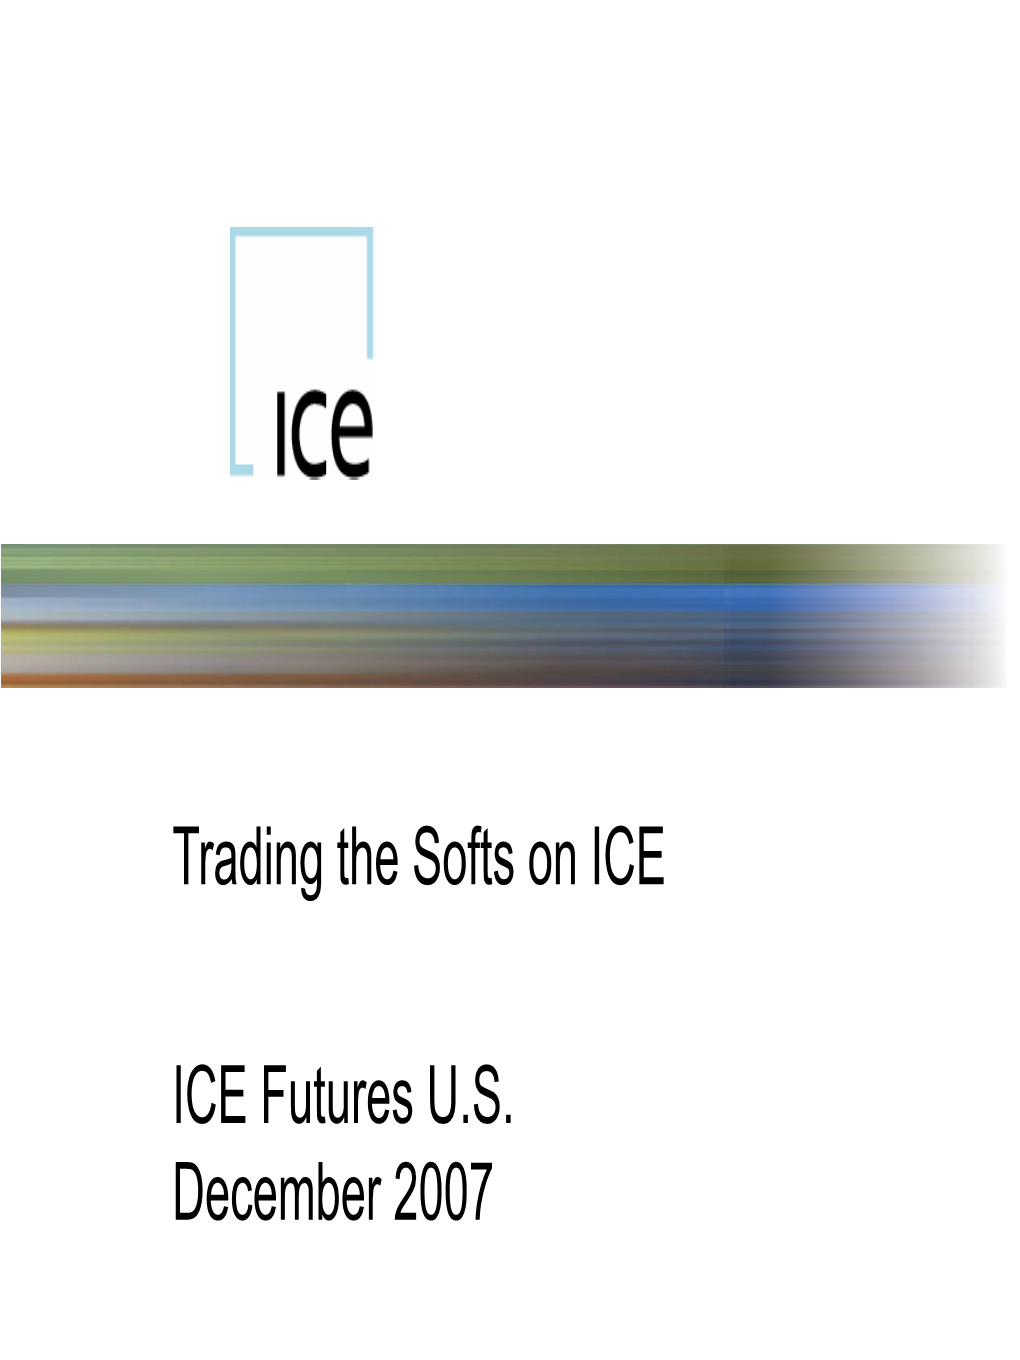 ICE Futures U.S. December 2007 Trading the Softs On